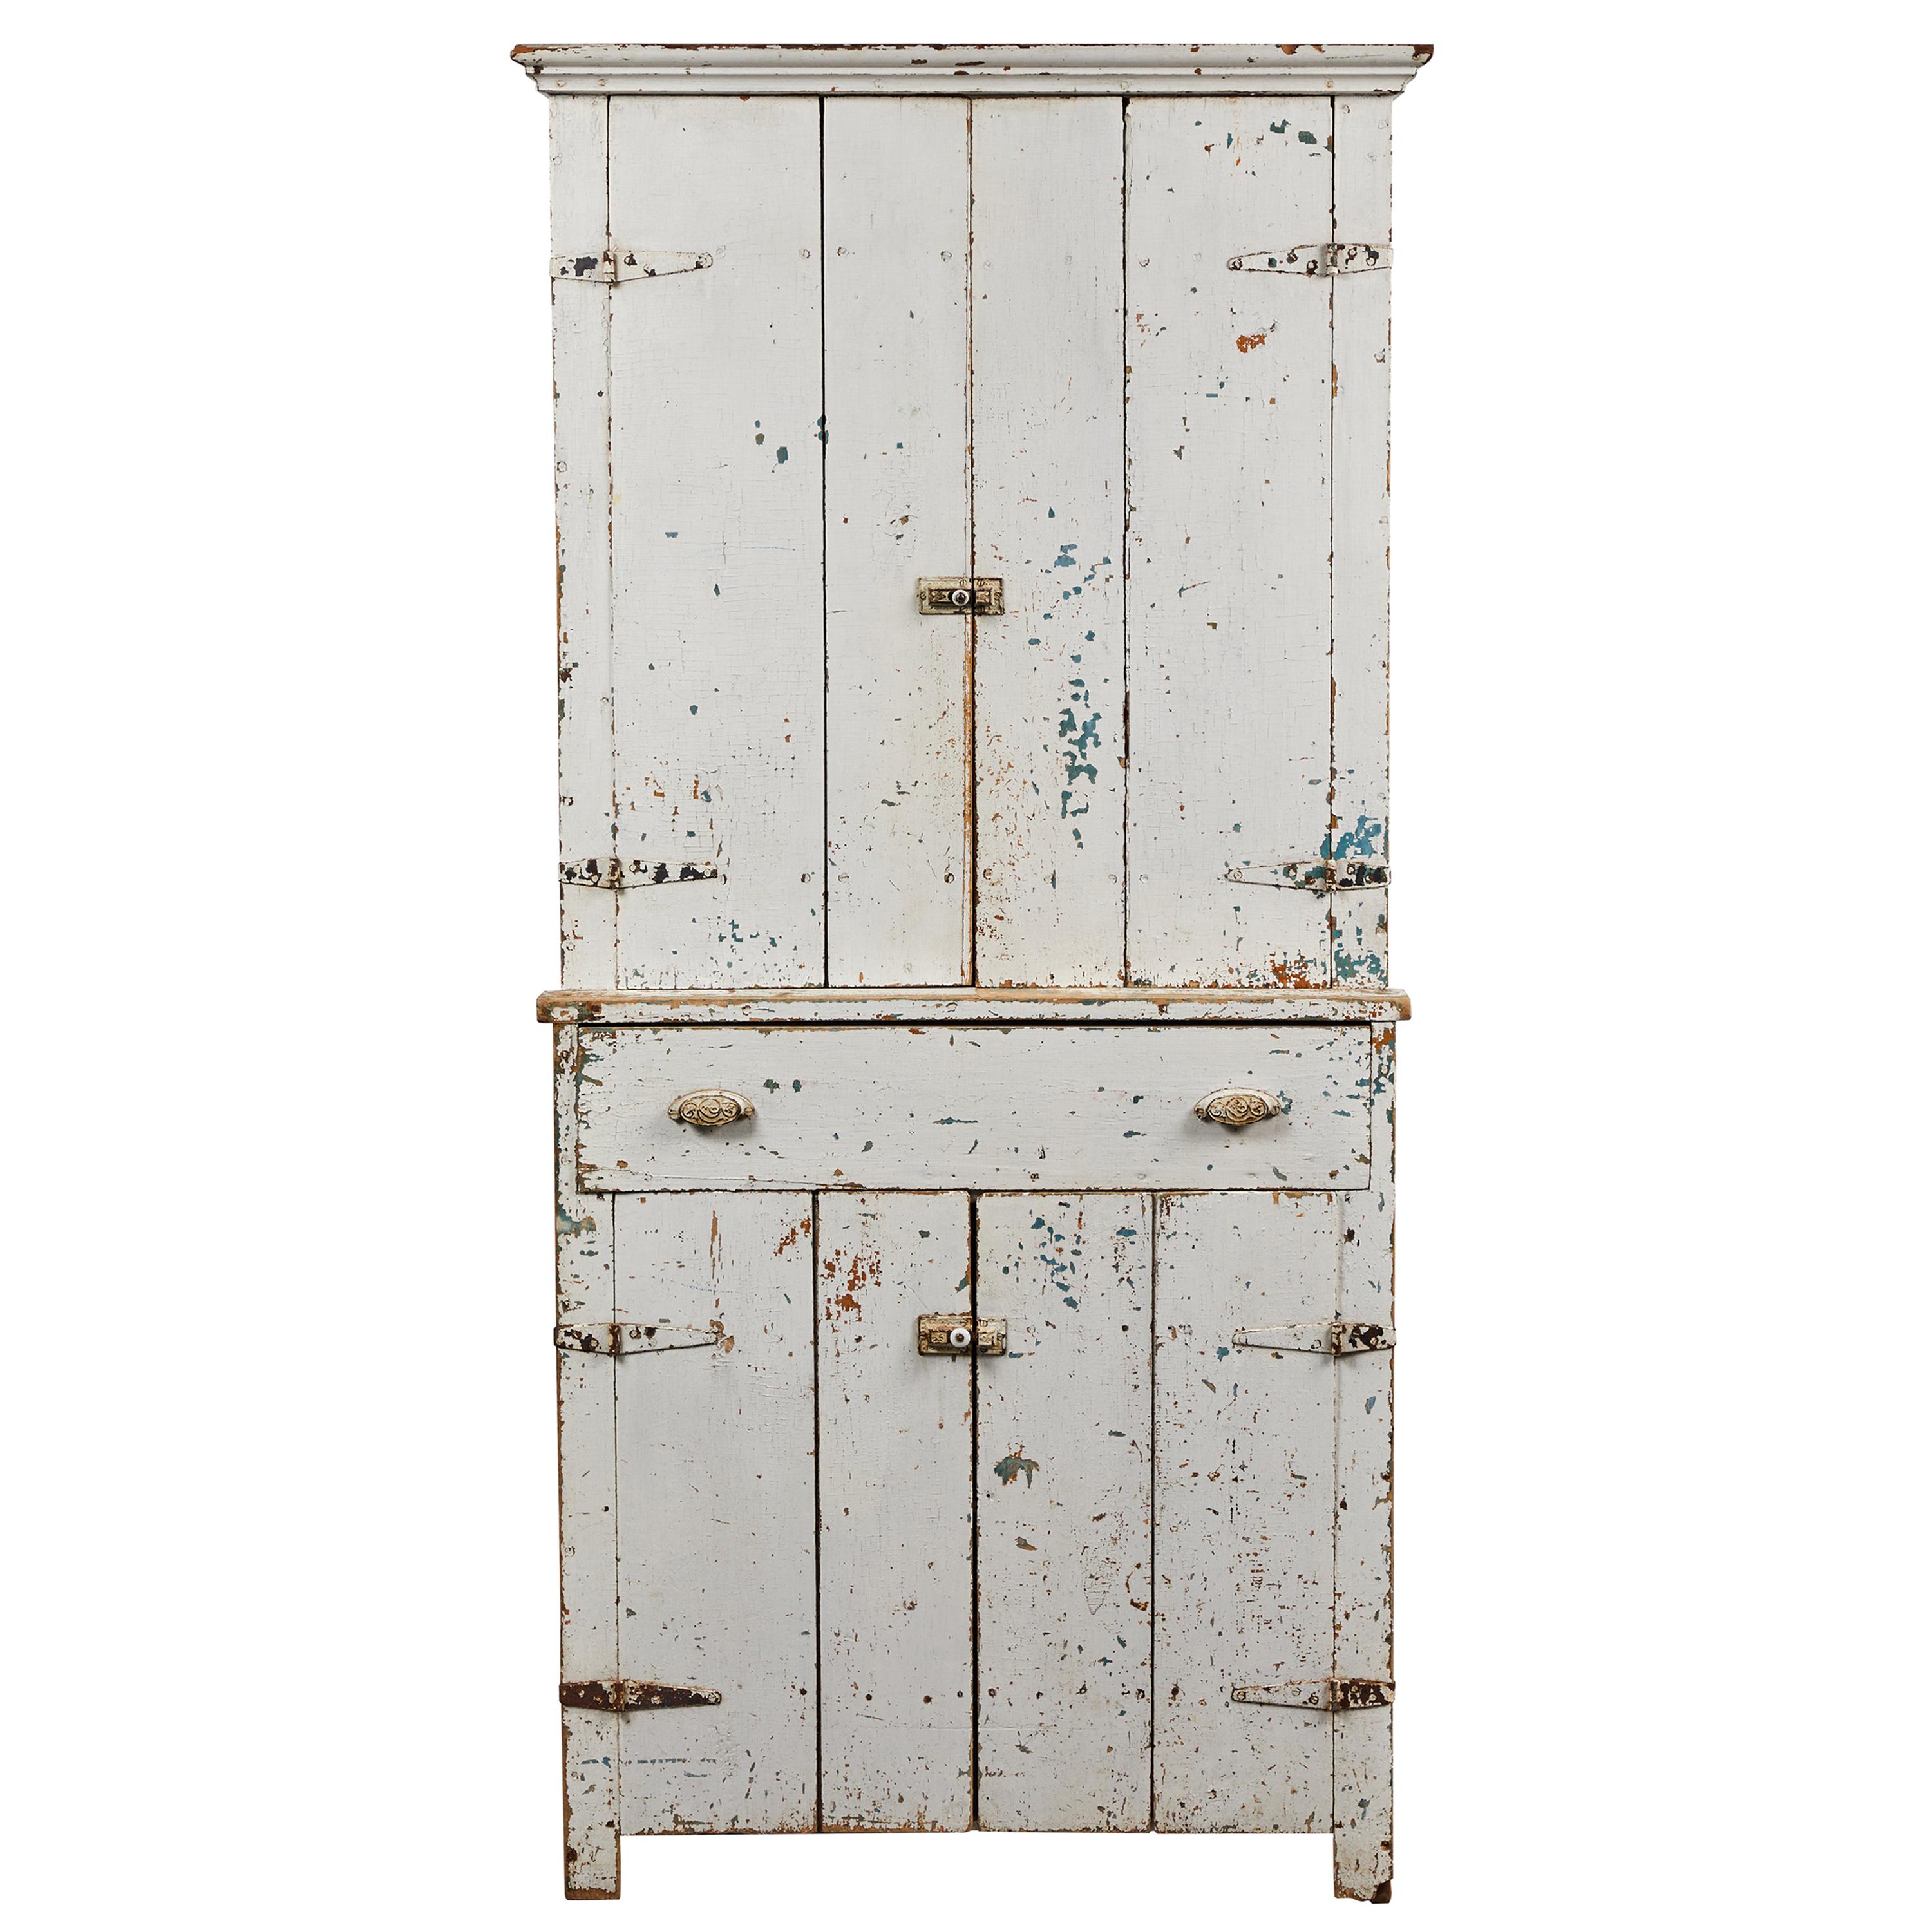 Early American Rustic White Painted Cabinet